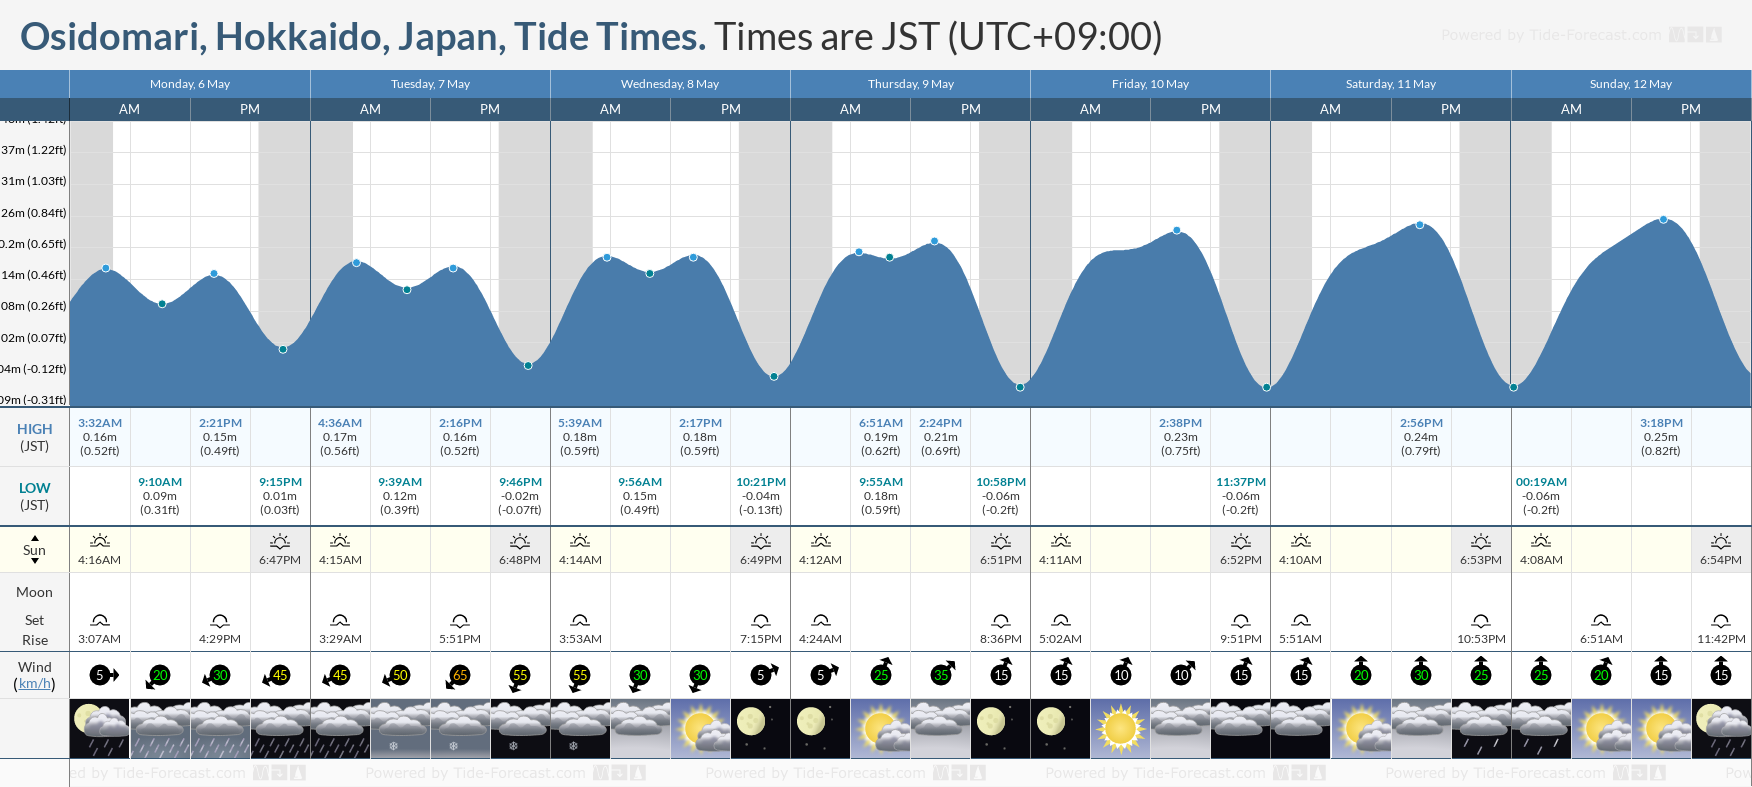 Osidomari, Hokkaido, Japan Tide Chart including high and low tide tide times for the next 7 days